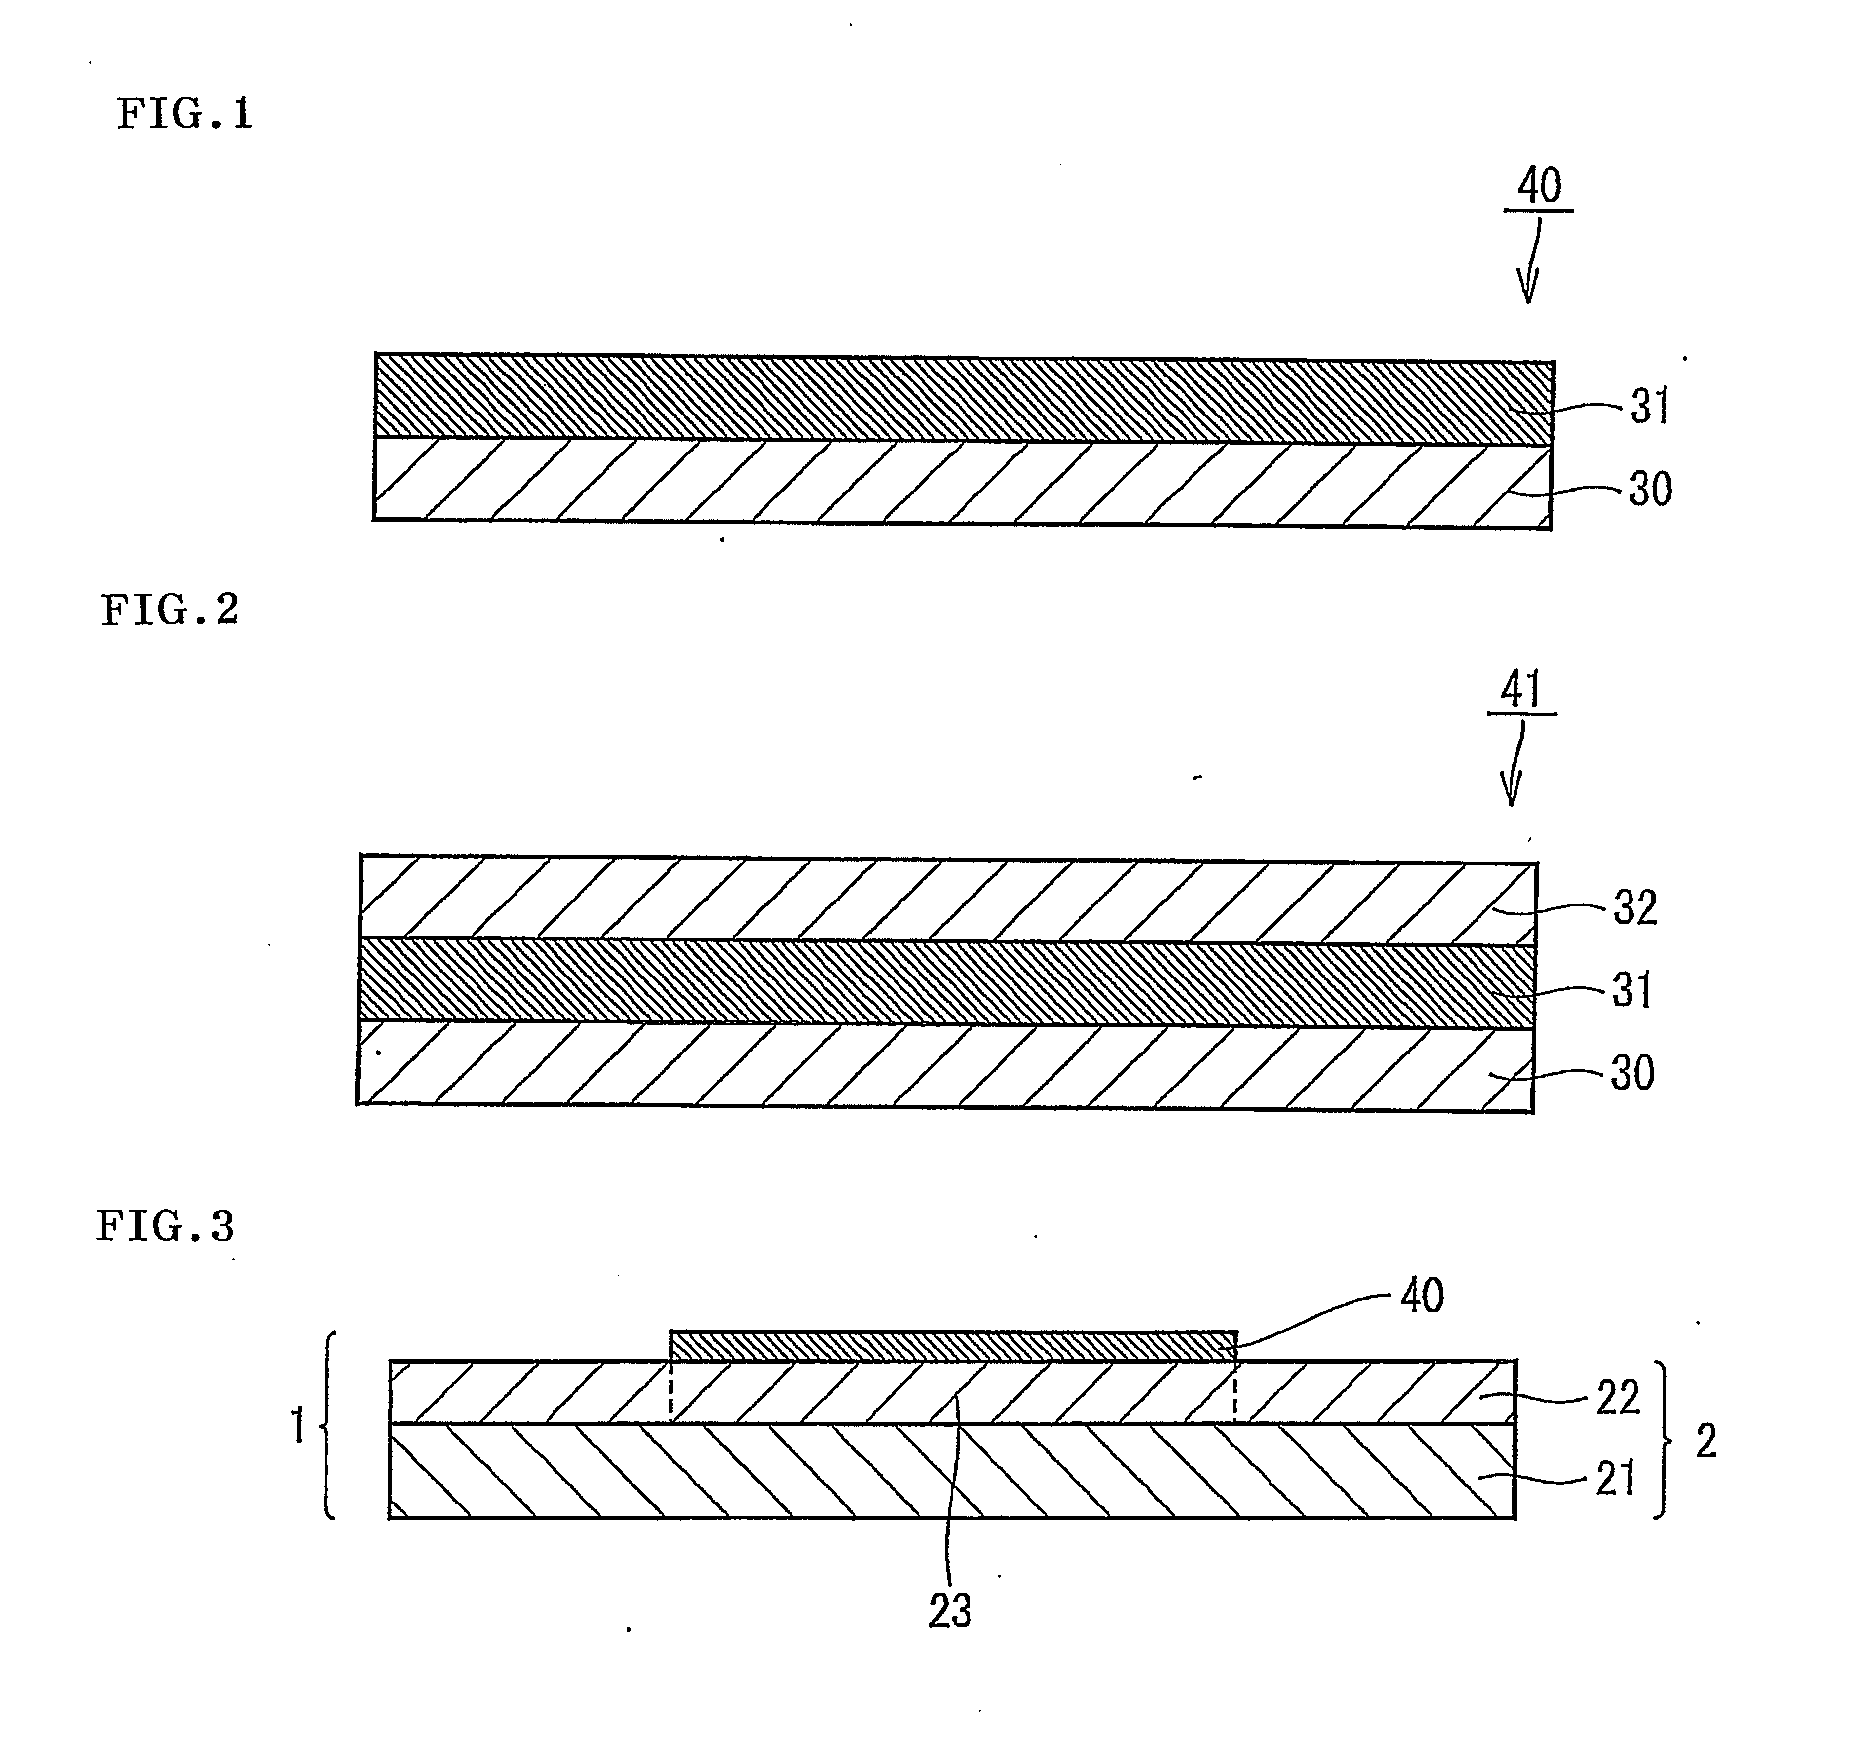 Film for the backside of flip-chip type semiconductor, dicing tape-integrated film for the backside of semiconductor, method of manufacturing film for the backside of flip-chip type semiconductor, and semiconductor device